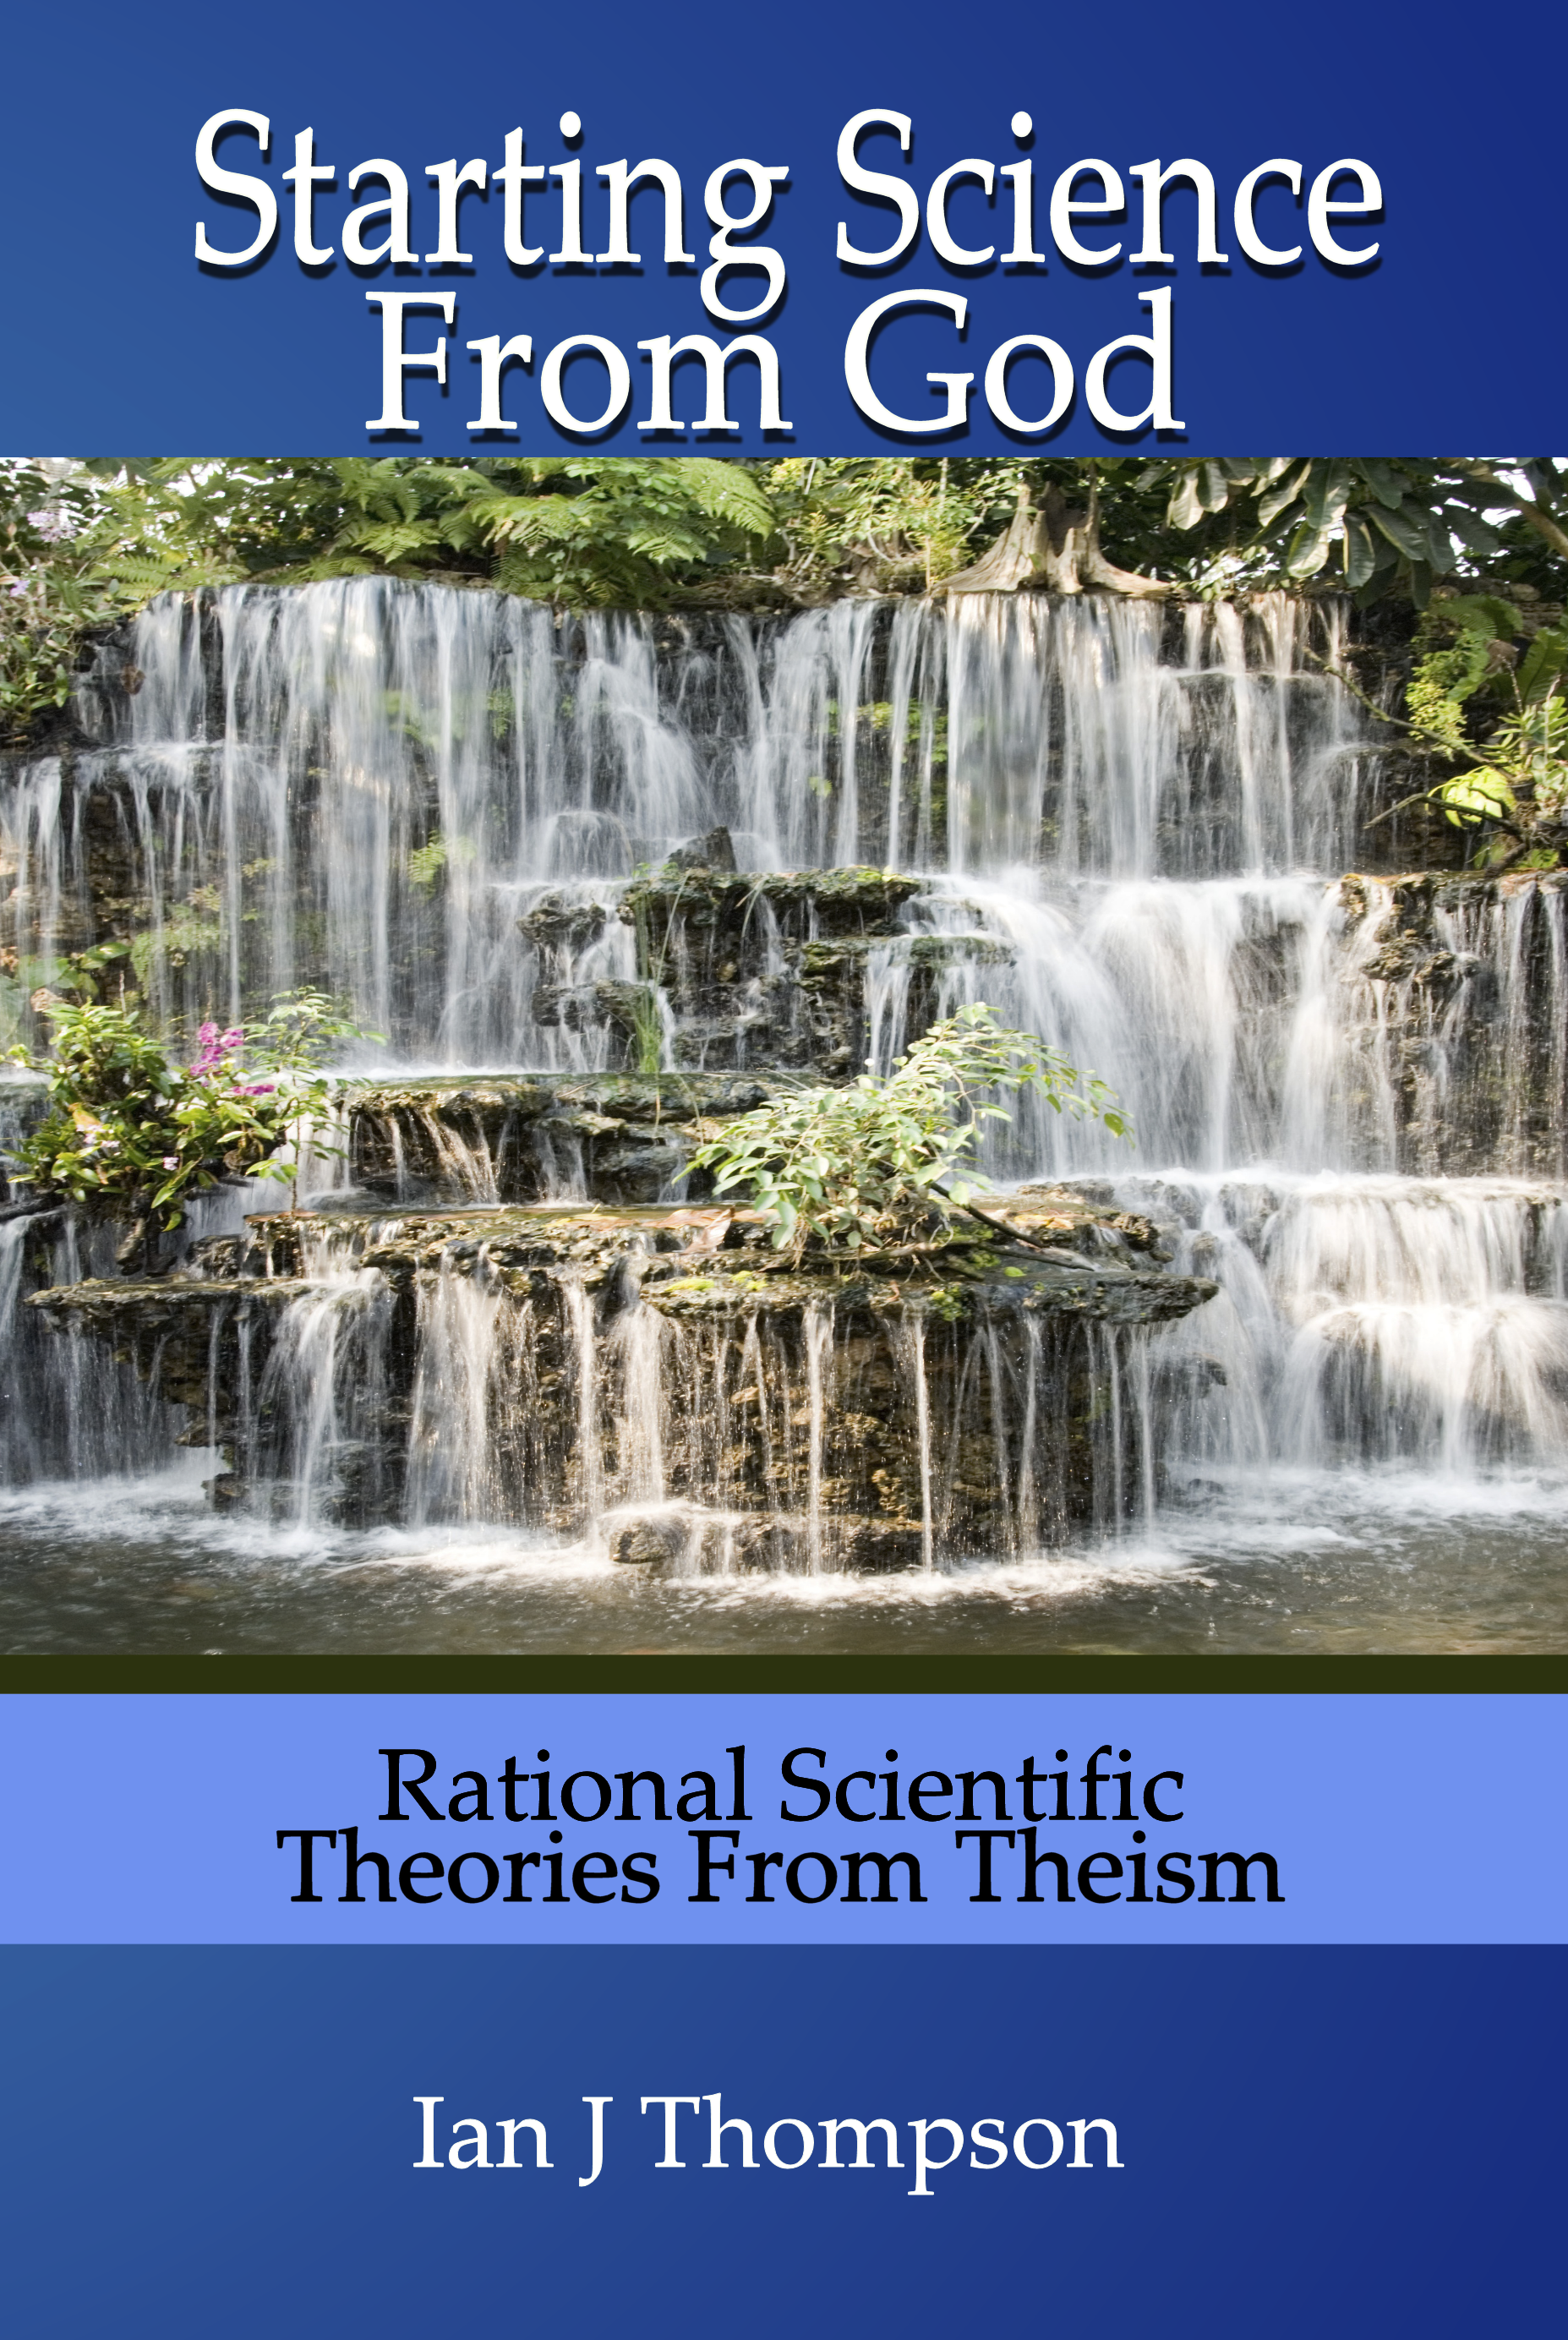 Starting Science from God